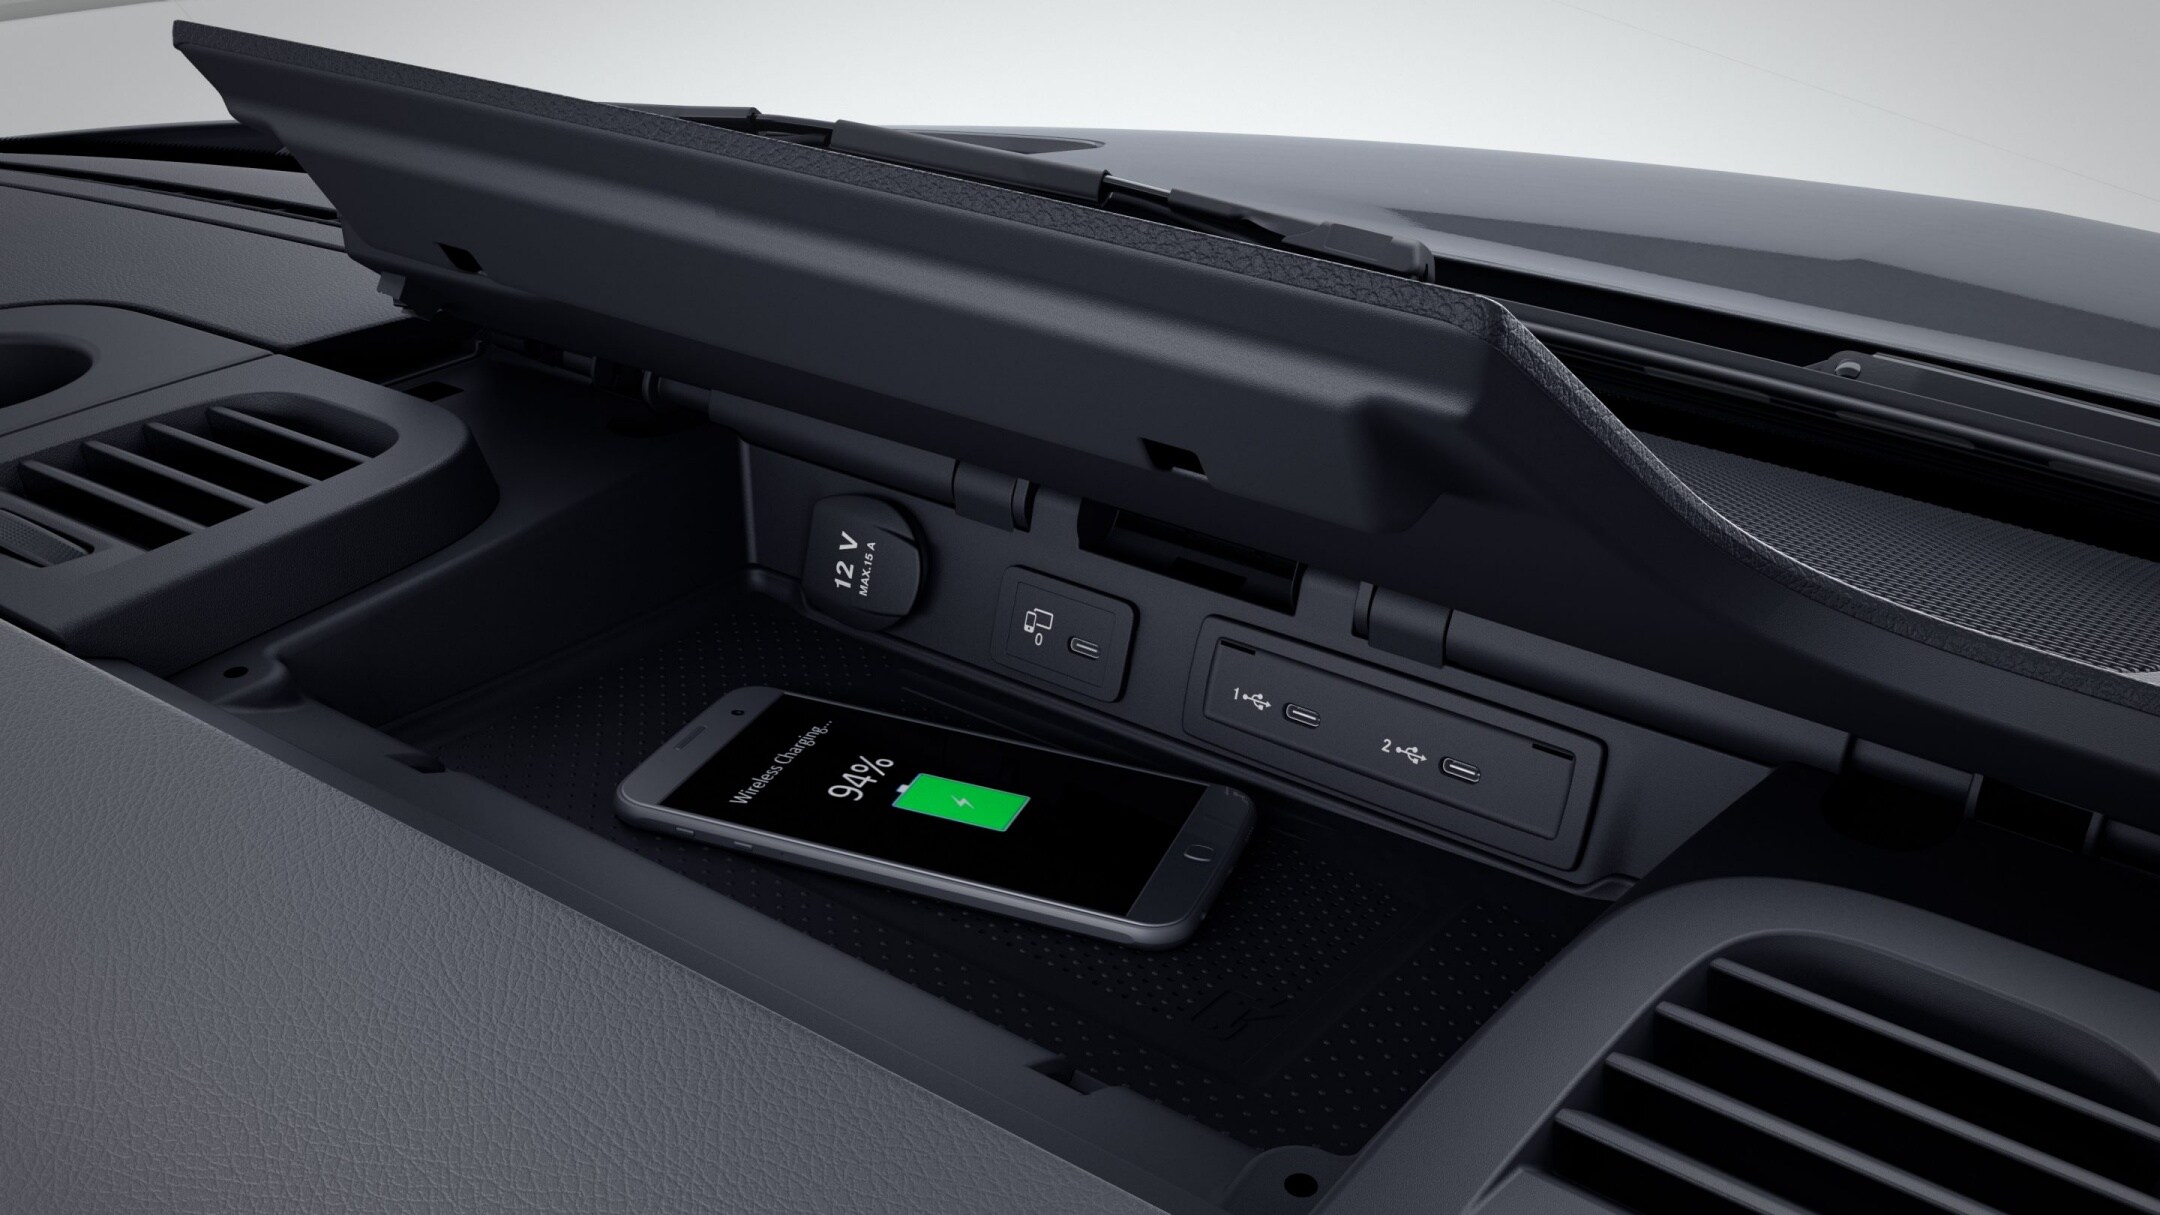 The smart compartment that charges your phone